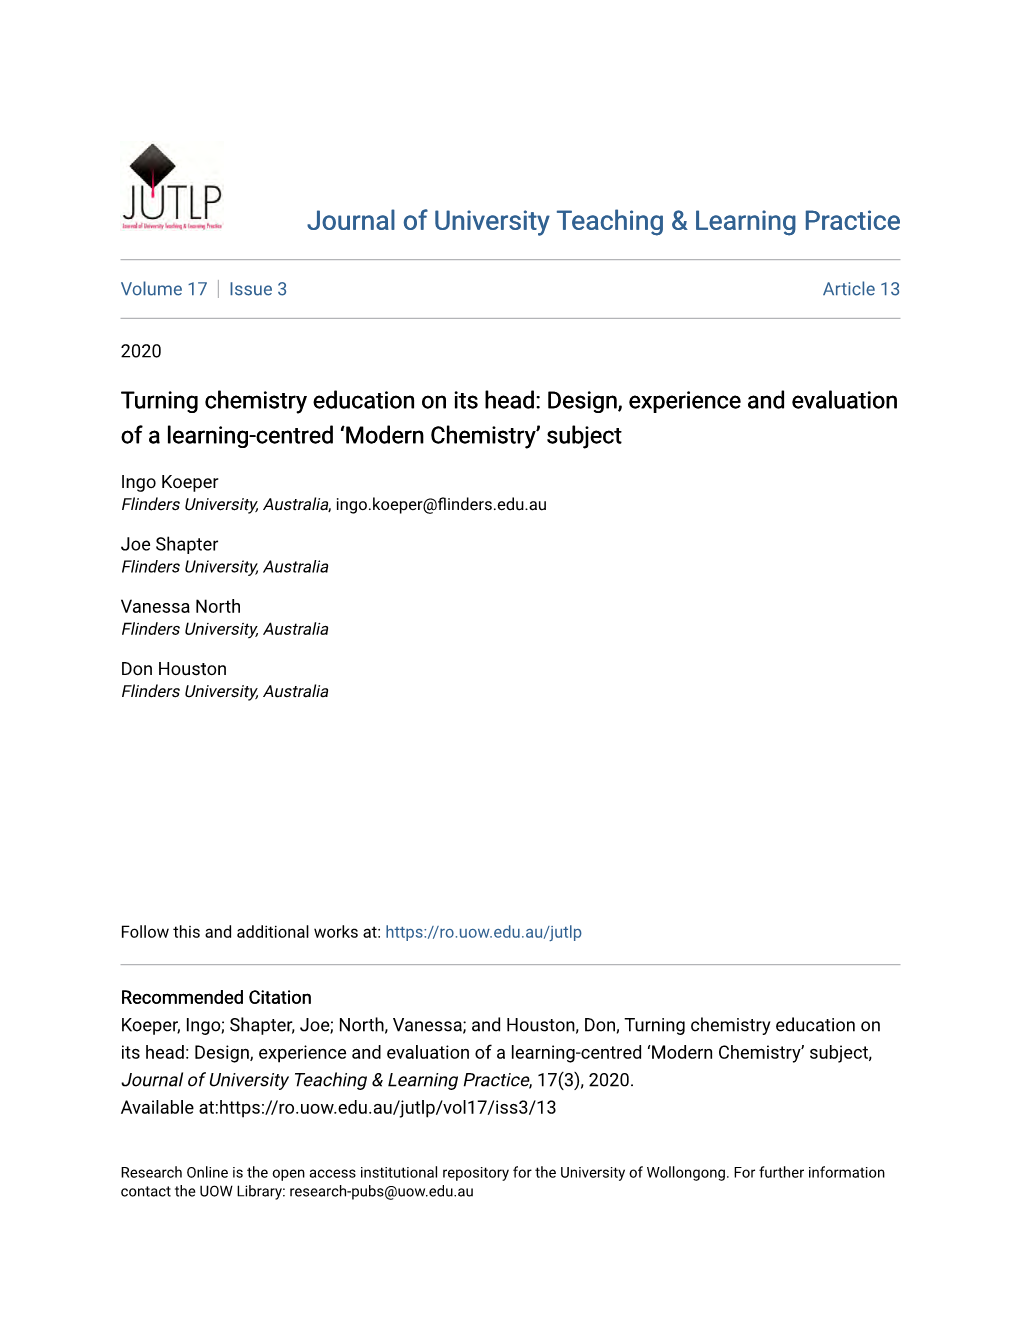 Turning Chemistry Education on Its Head: Design, Experience and Evaluation of a Learning-Centred ‘Modern Chemistry’ Subject